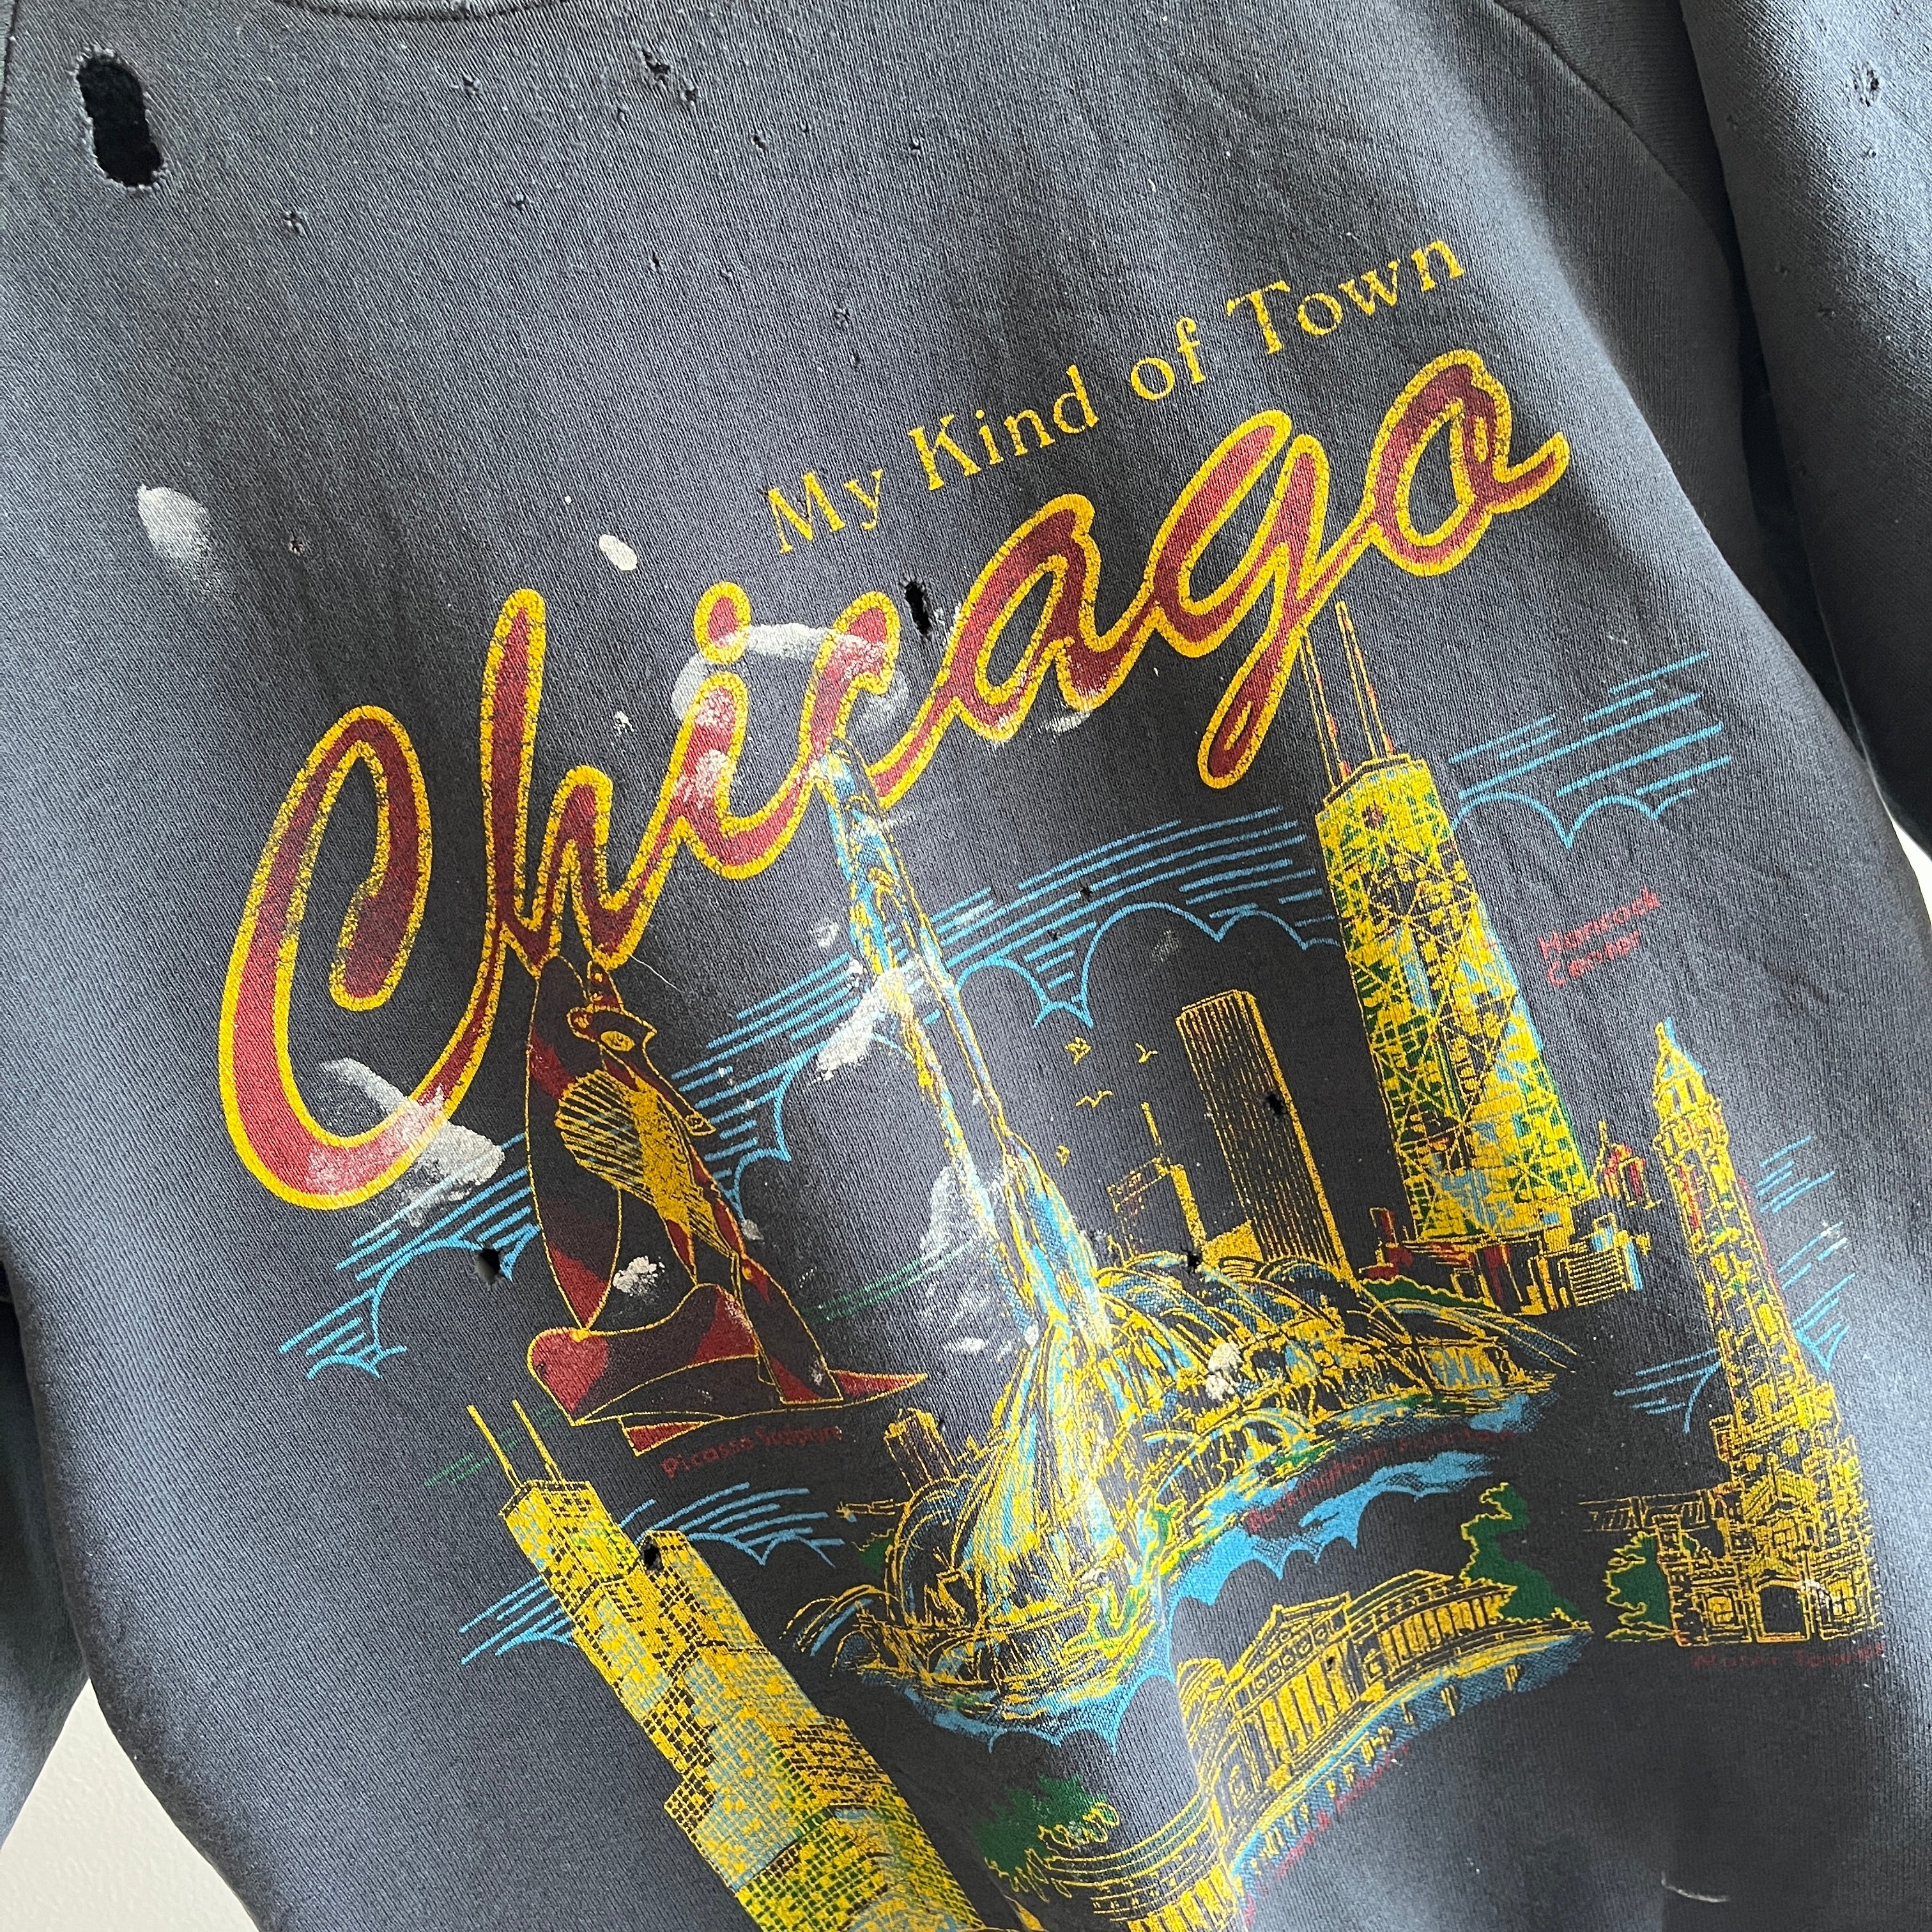 1980s Very Beat Up Chicago Graphic Cut Sleeve Sweatshirt - THIS. IS. RAD.